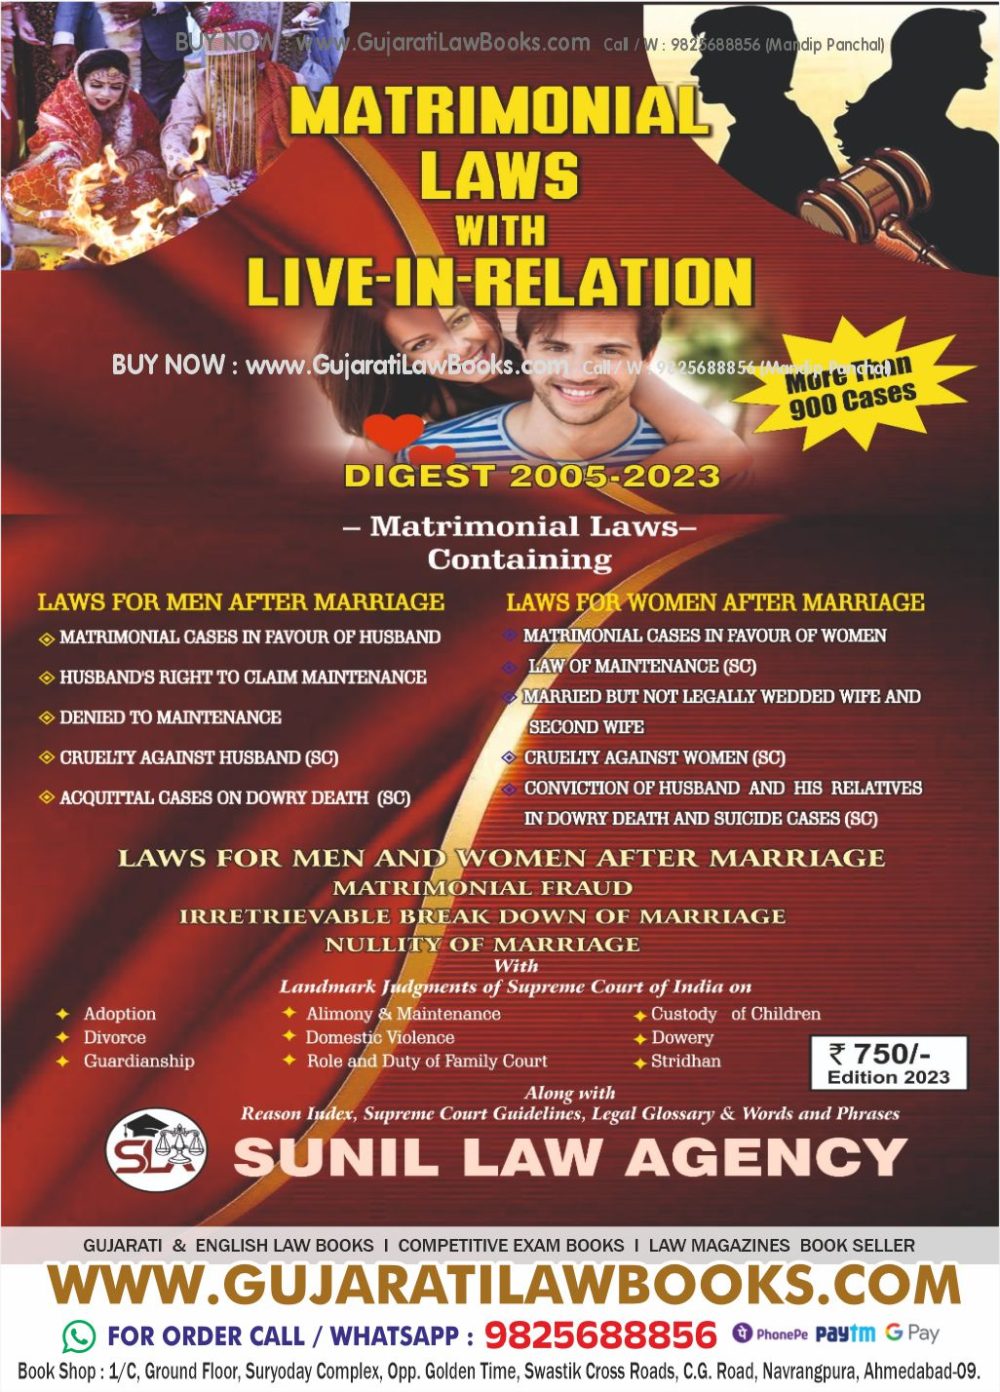 Matrimonial Laws with Live - in - Relation - Digest 2005-2023